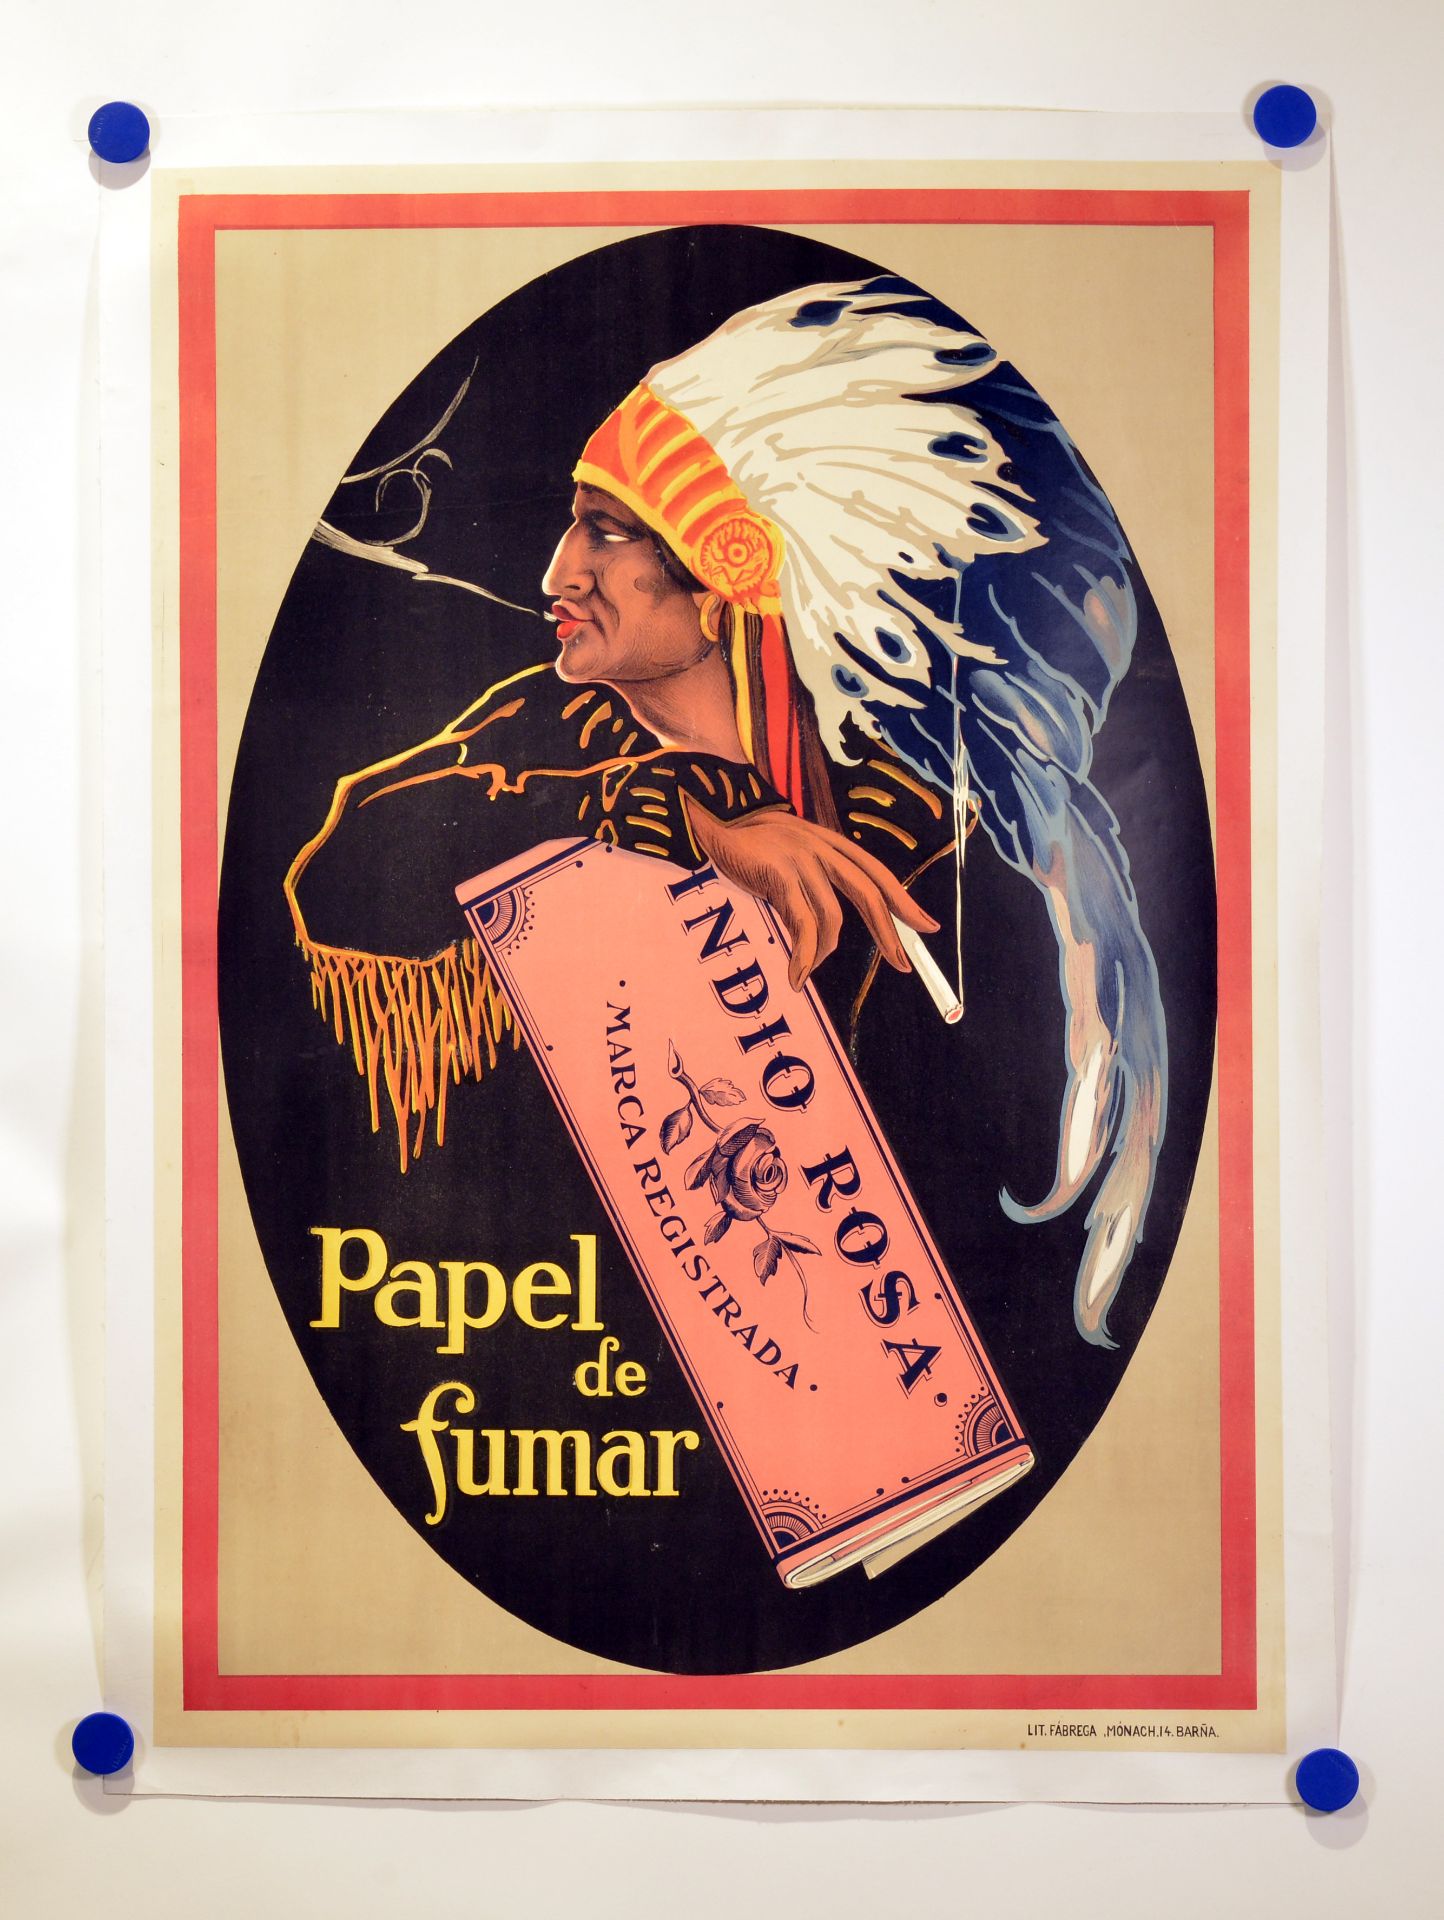 Poster, Indio Rosa, poster-lithograph, 1920s, 68 x 96 cm, on linen, C 1-